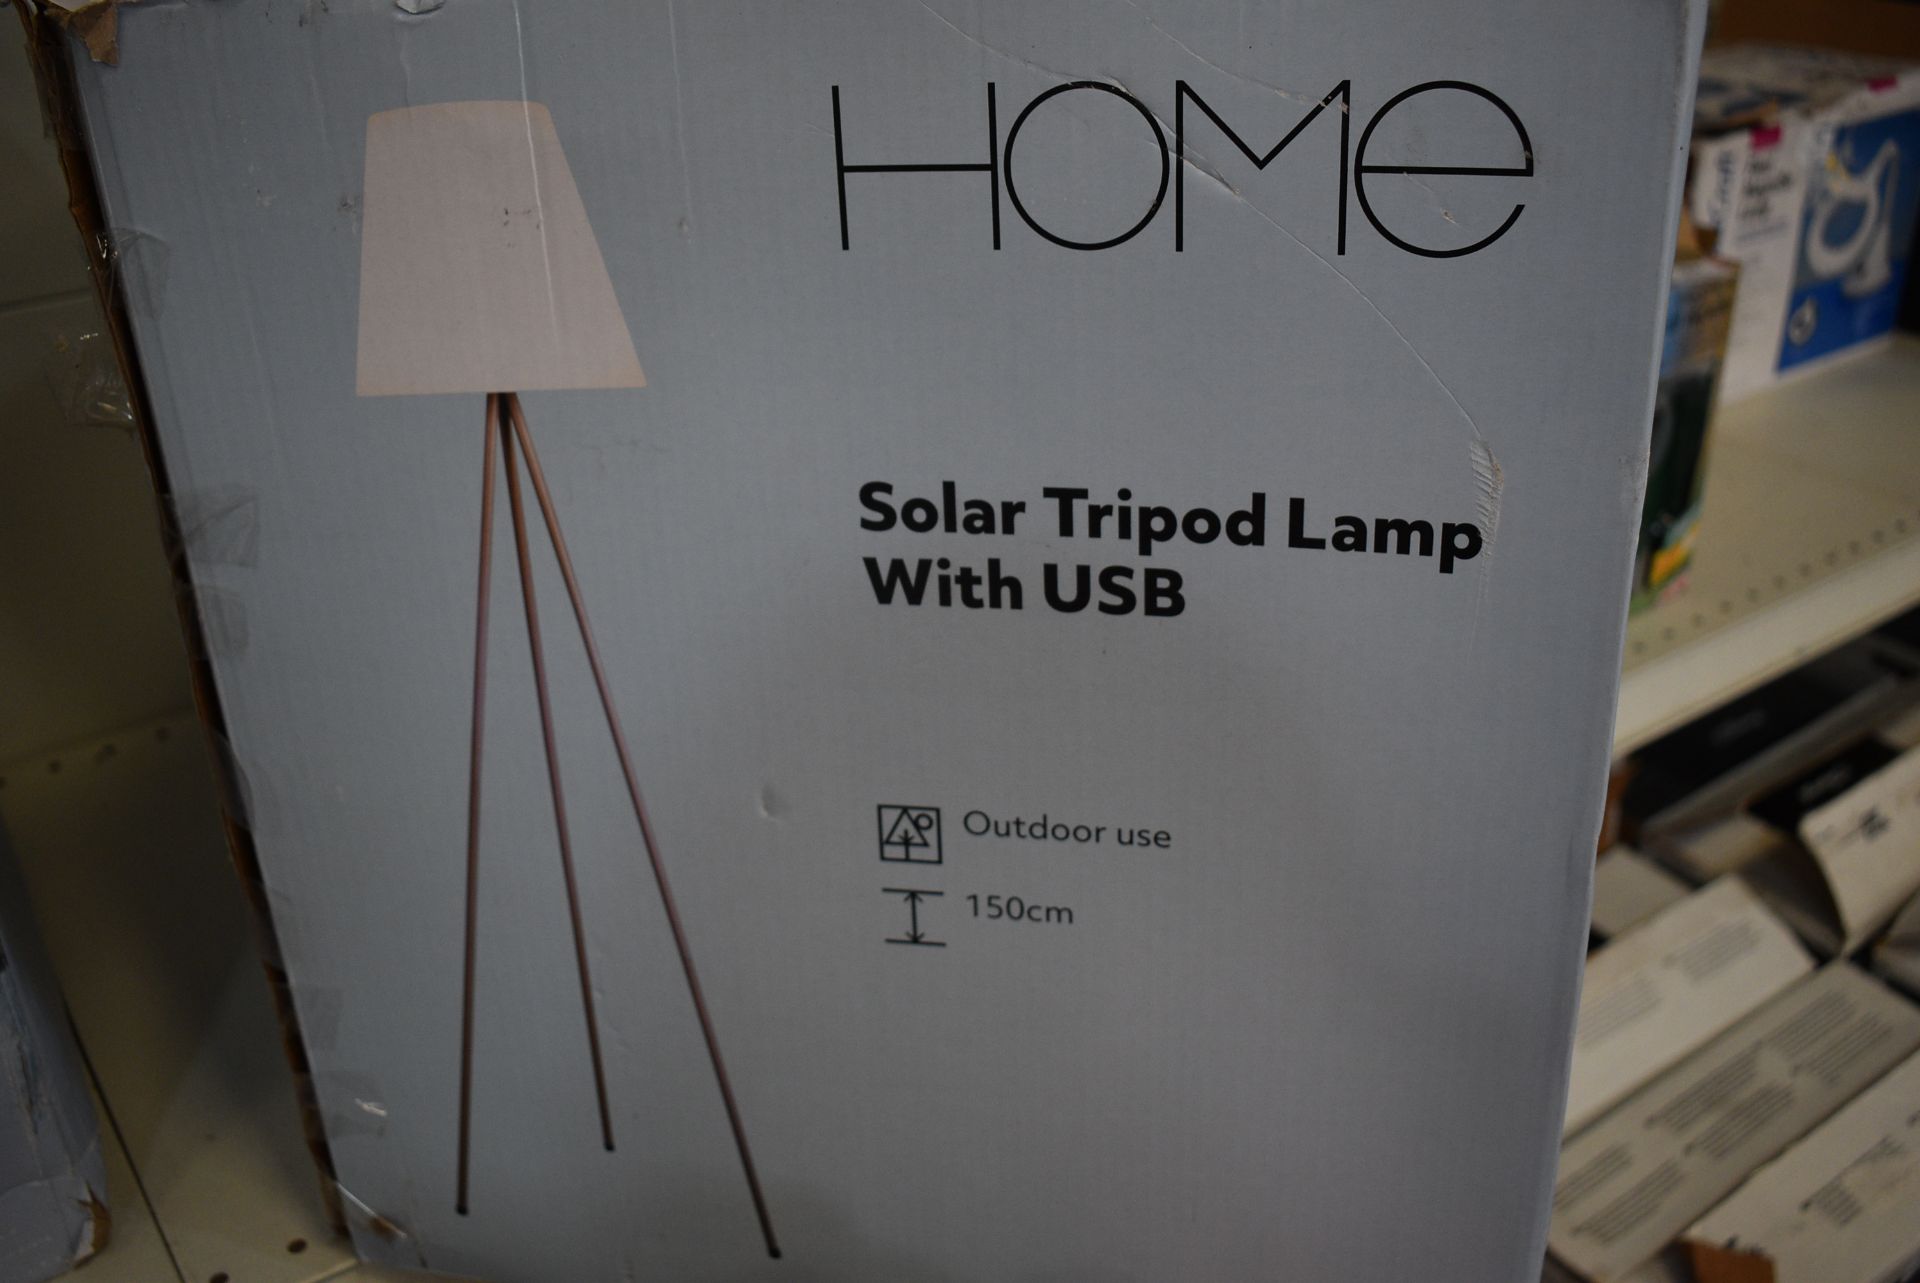 Solar Tripod Lamp with USB - Image 4 of 4